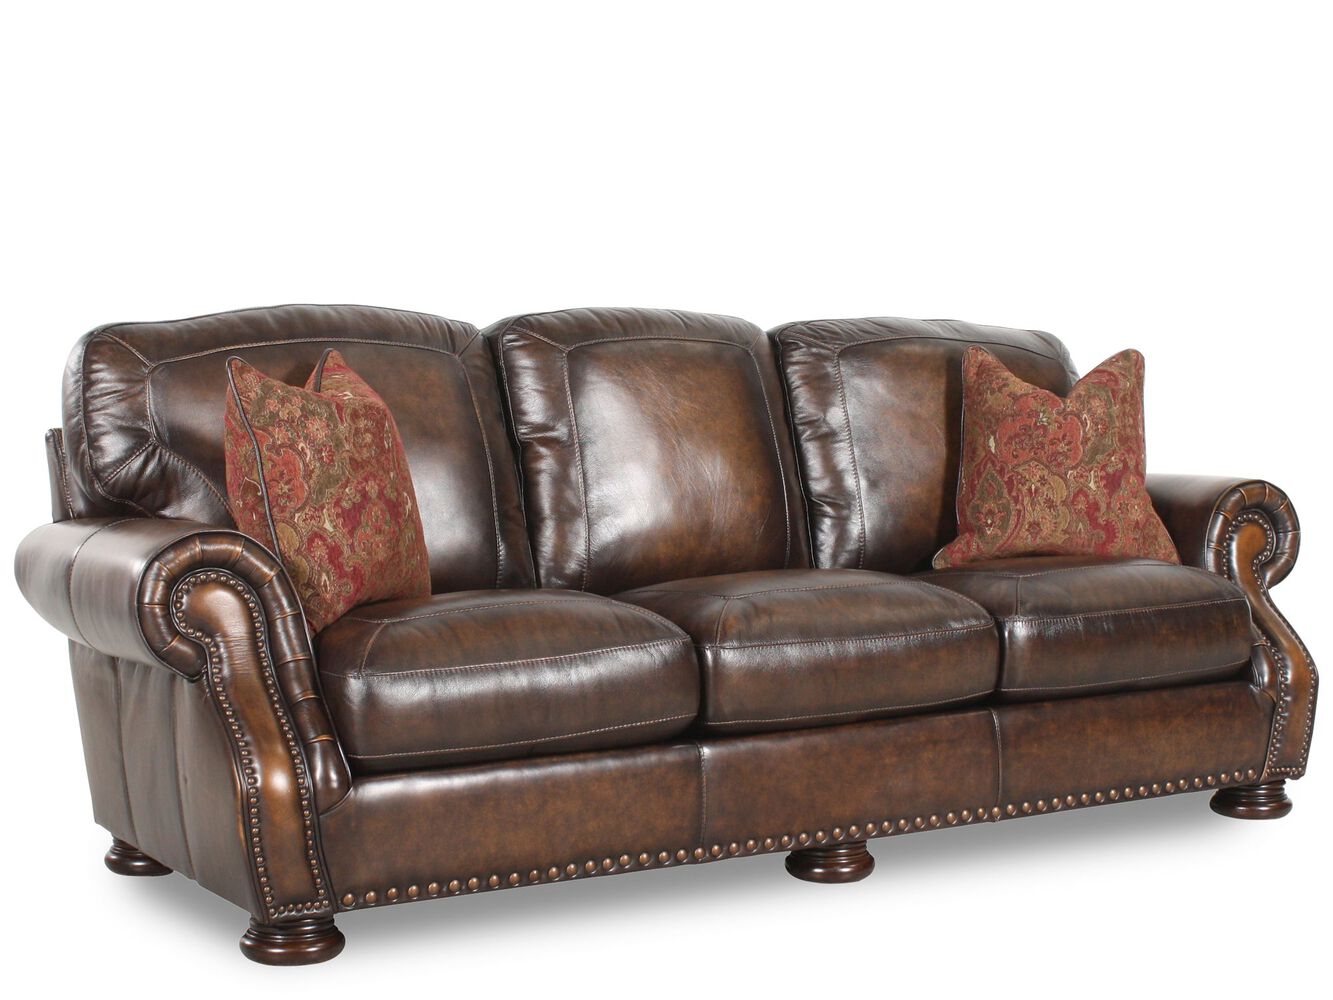 NailheadAccented Leather 97" Sofa in Brown Mathis